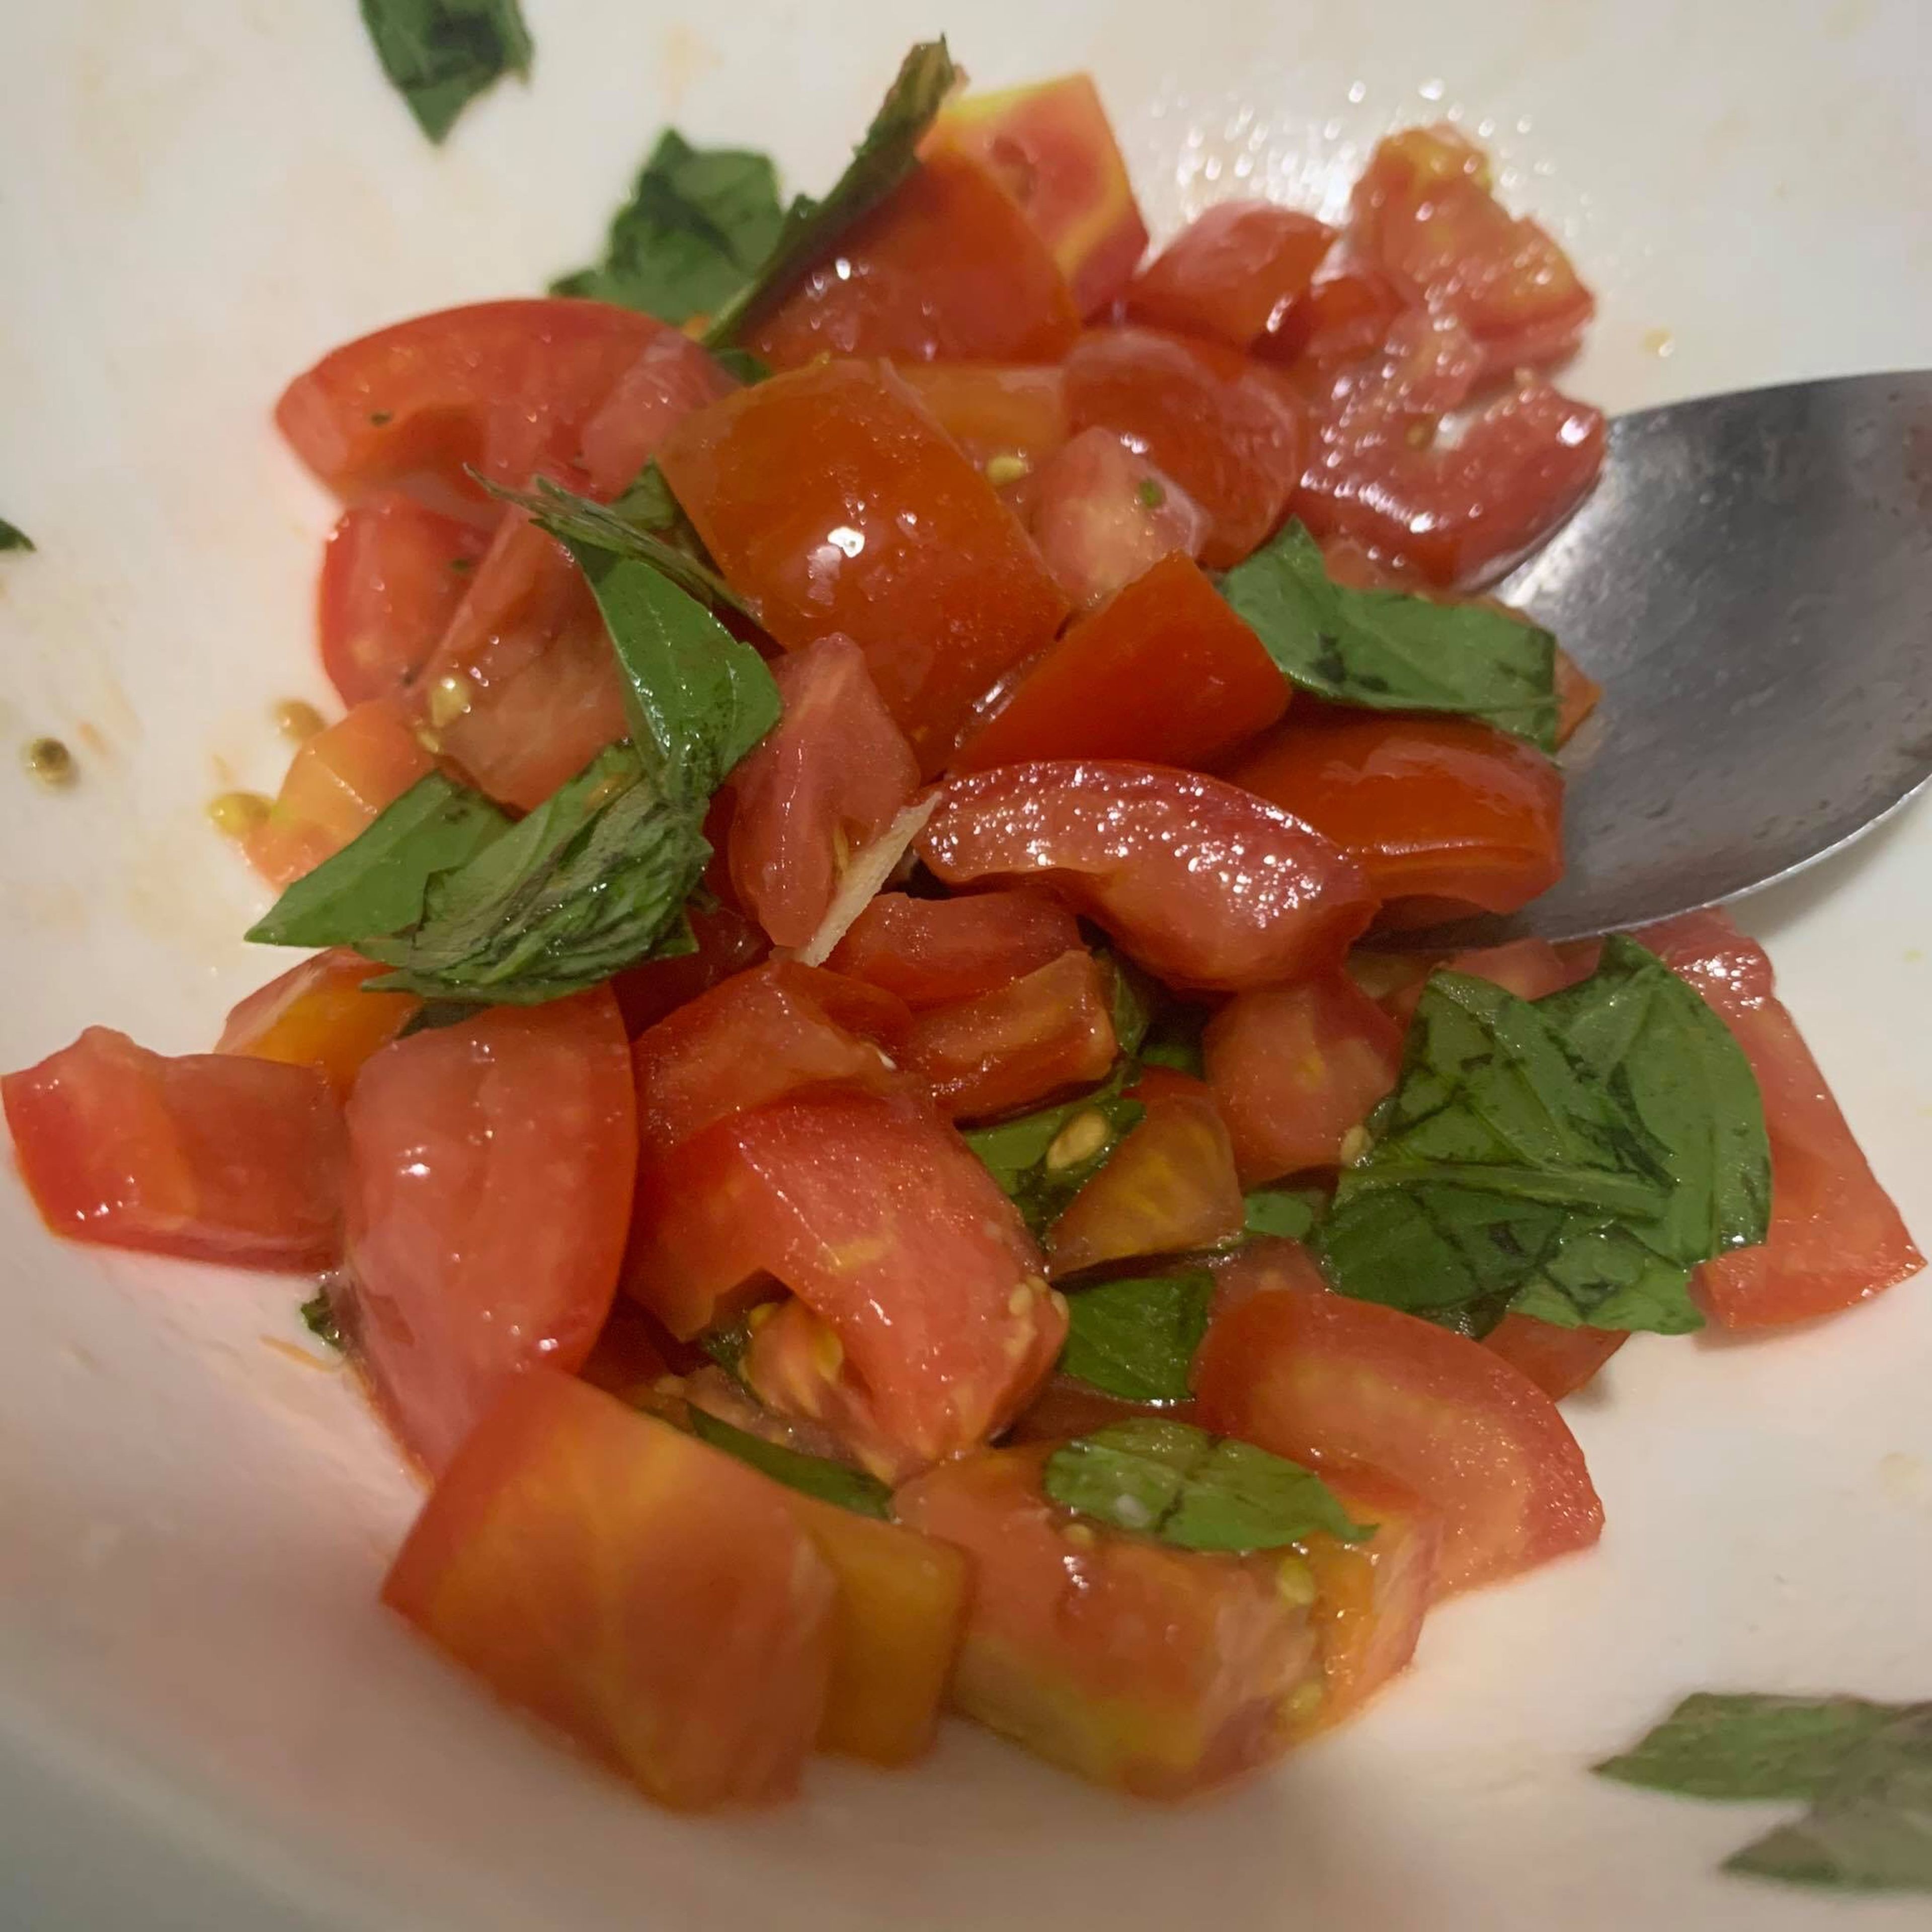 I chopped the tomatoes and cut the sweet basil into this small then mixed it with olive oil and salt. You add it as your taste that’s why I didn’t put how much I used.